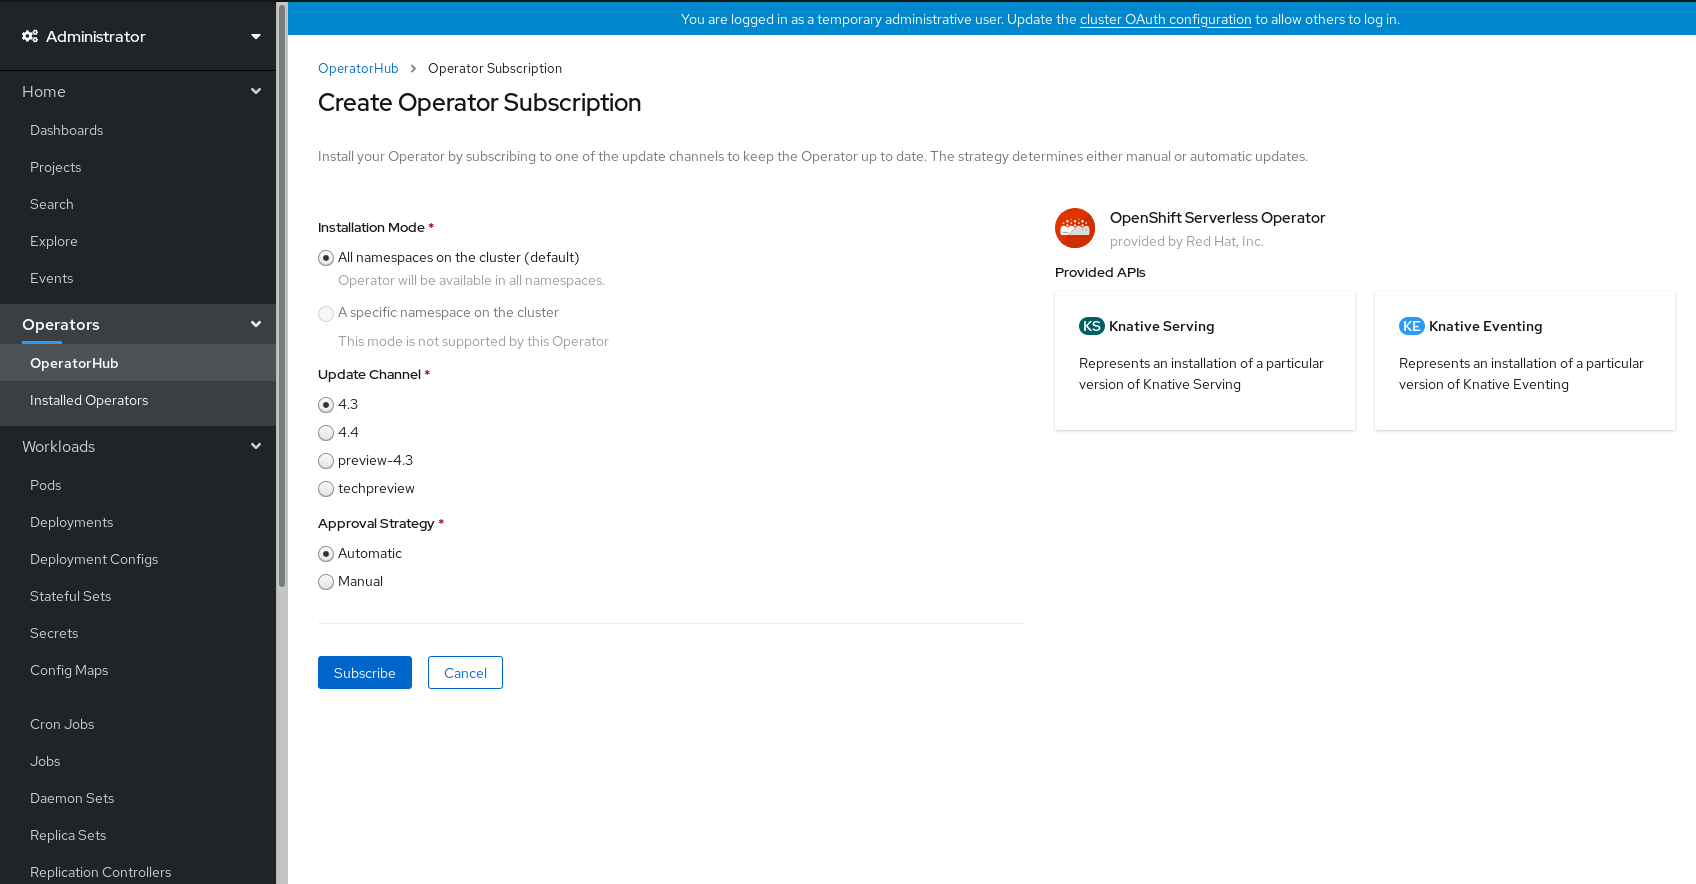 Create Operator Subscription page